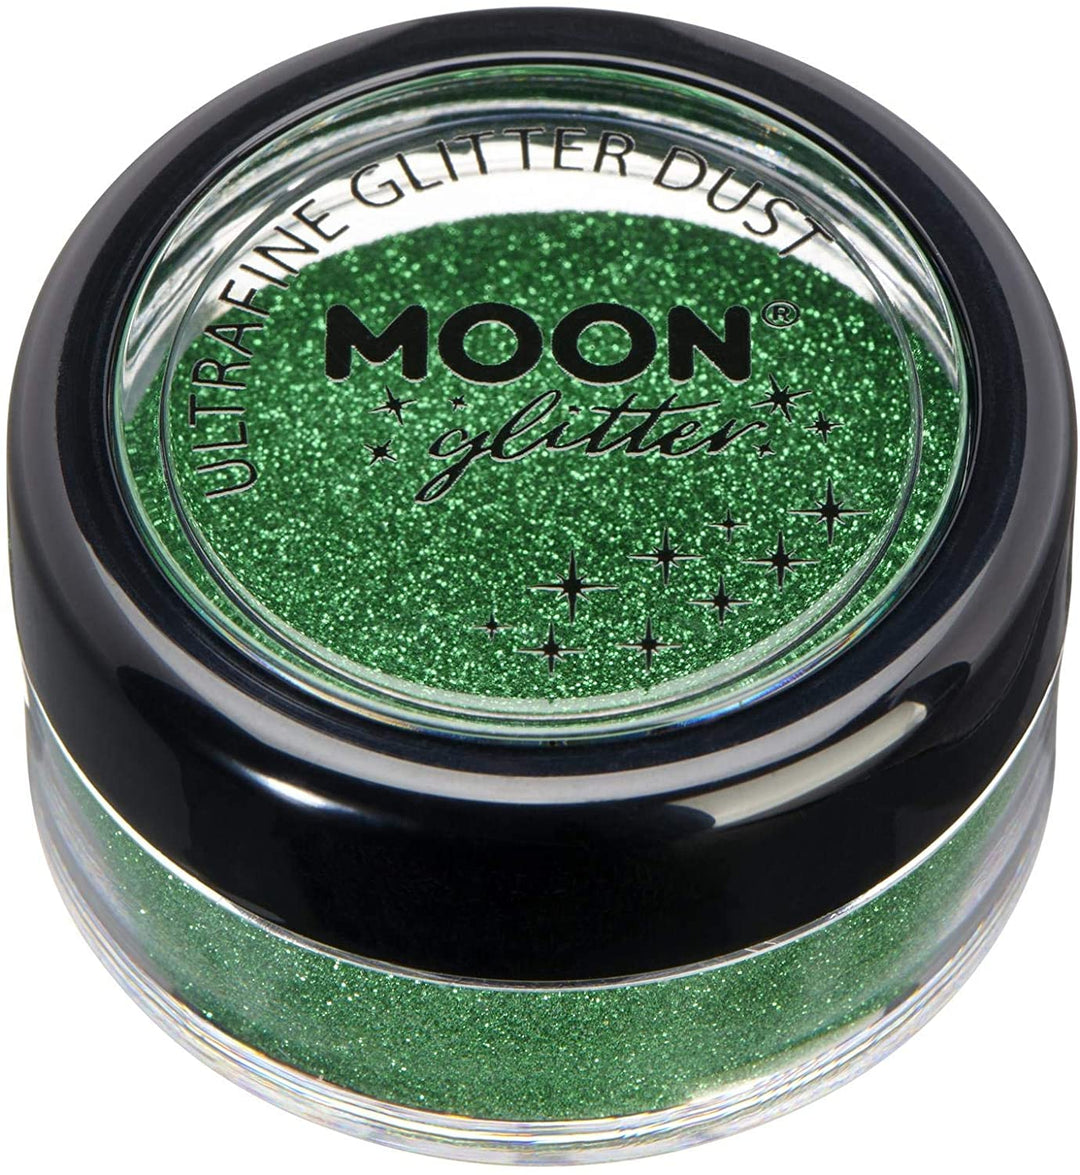 Classic Ultrafine Glitter Dust by Moon Glitter Green Cosmetic Festival Makeup Glitter for Face, Body, Nails, Hair, Lips